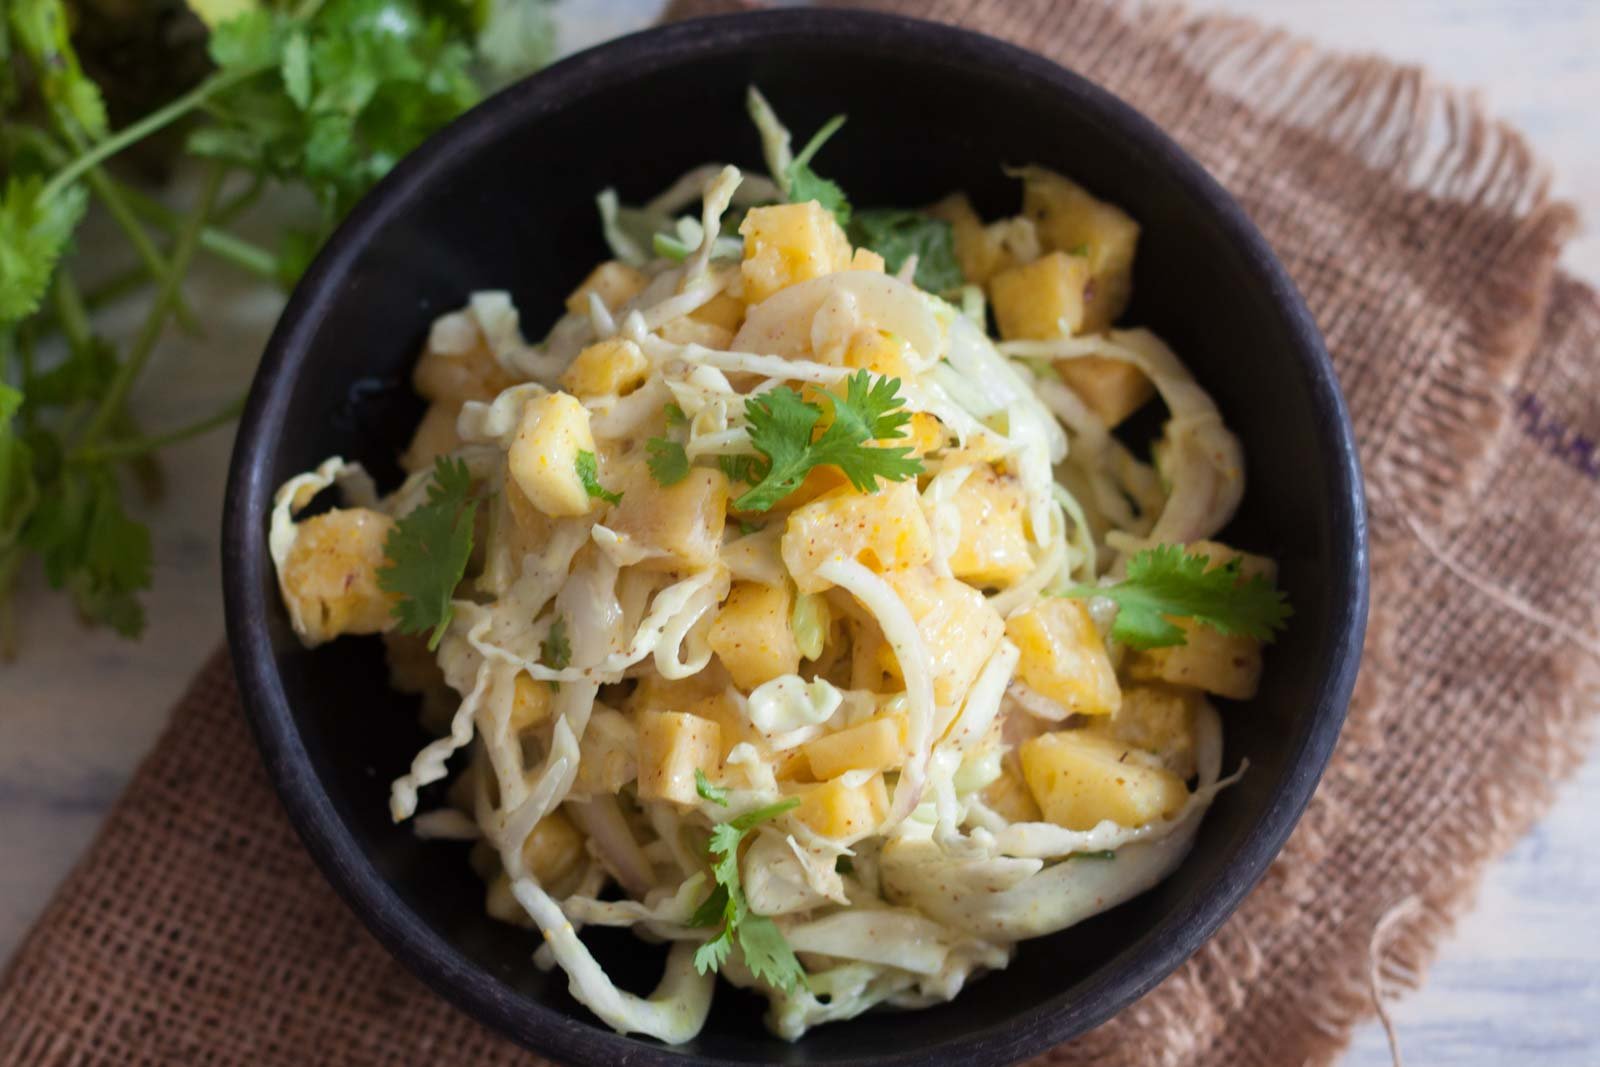 Pineapple, Onions and Cabbage Slaw with Honey Mustard Recipe